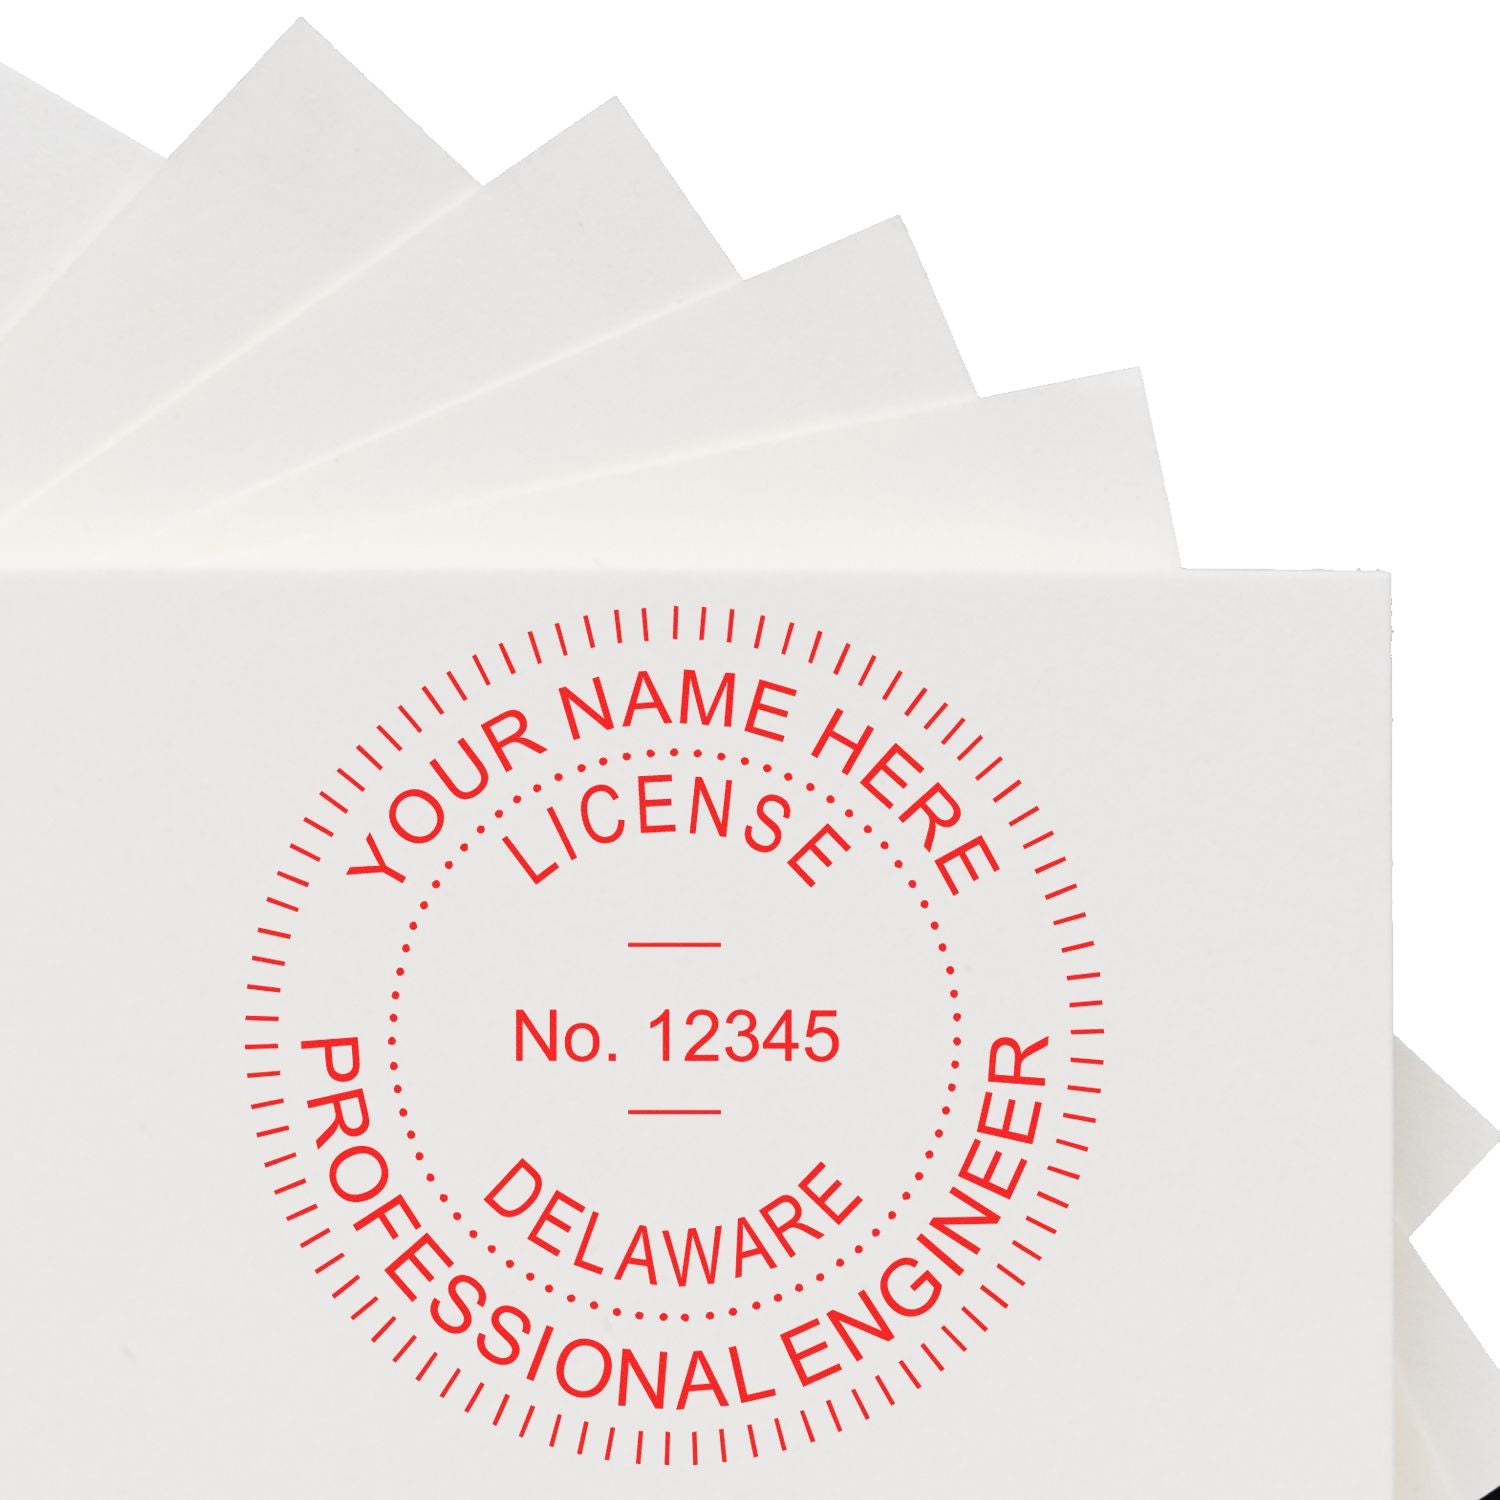 A photograph of the Premium MaxLight Pre-Inked Delaware Engineering Stamp stamp impression reveals a vivid, professional image of the on paper.